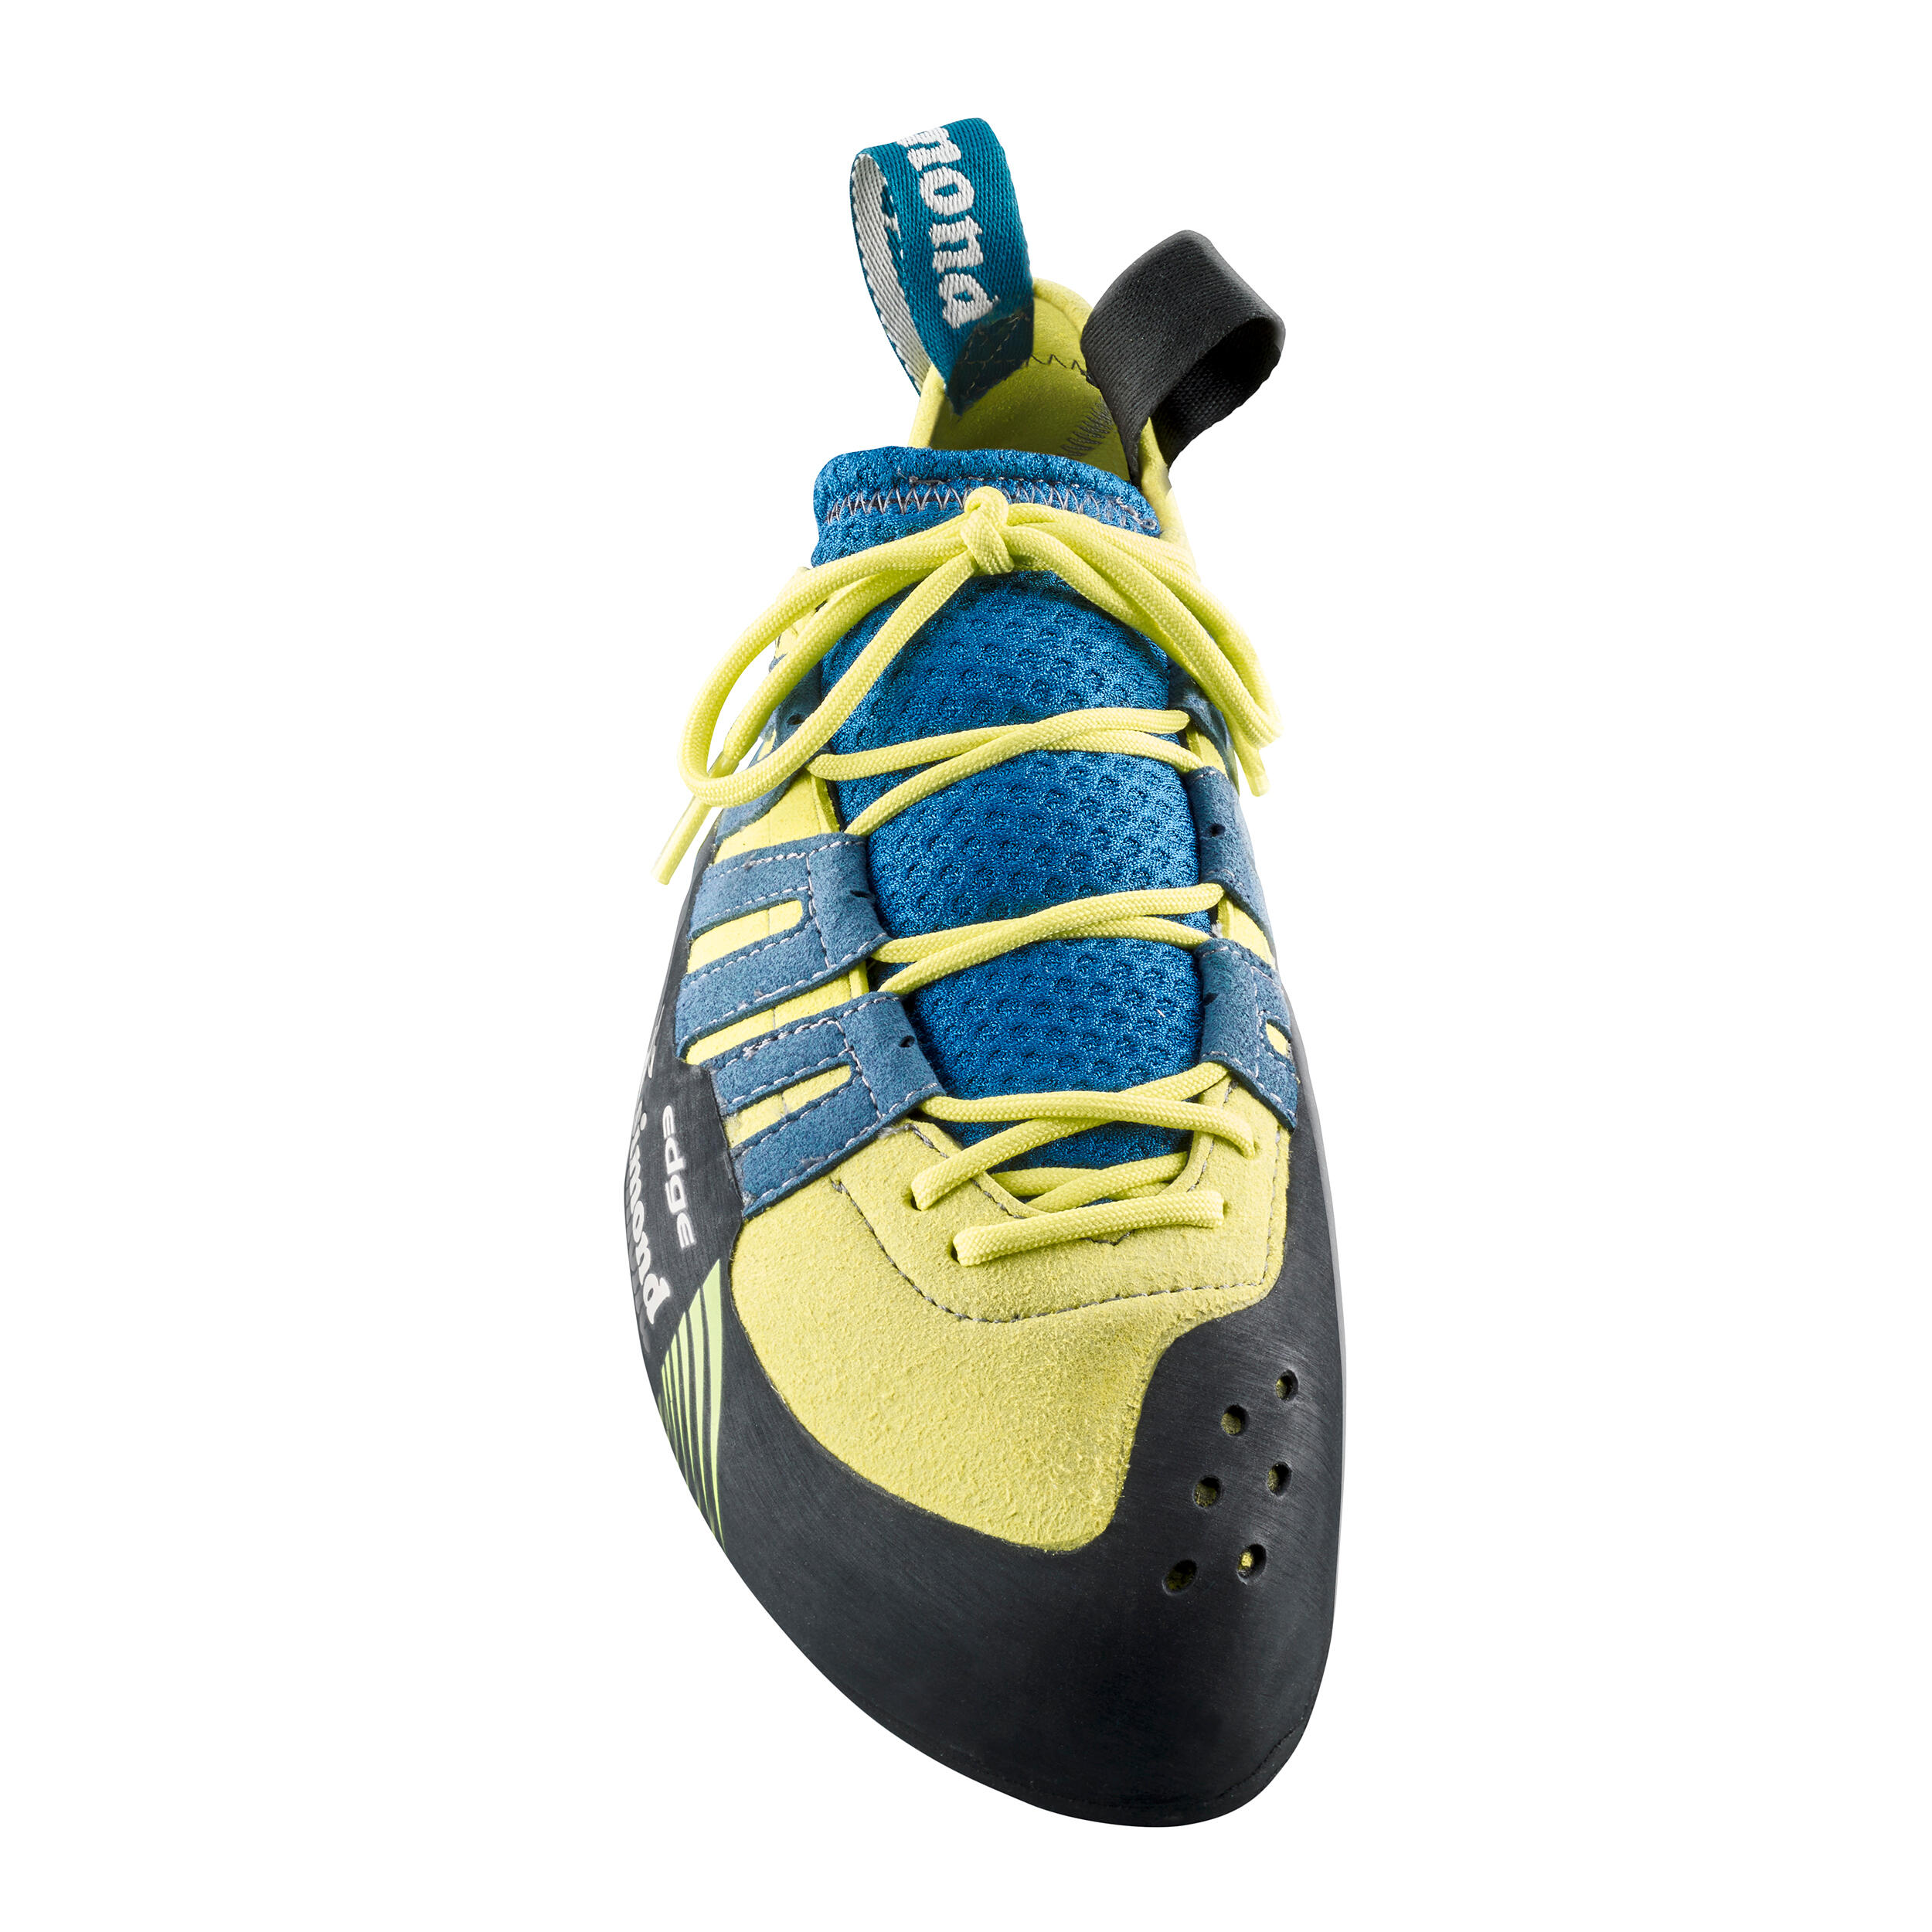 CLIMBING SHOES EDGE LACES V2 - ANISEED/BLUE 5/13